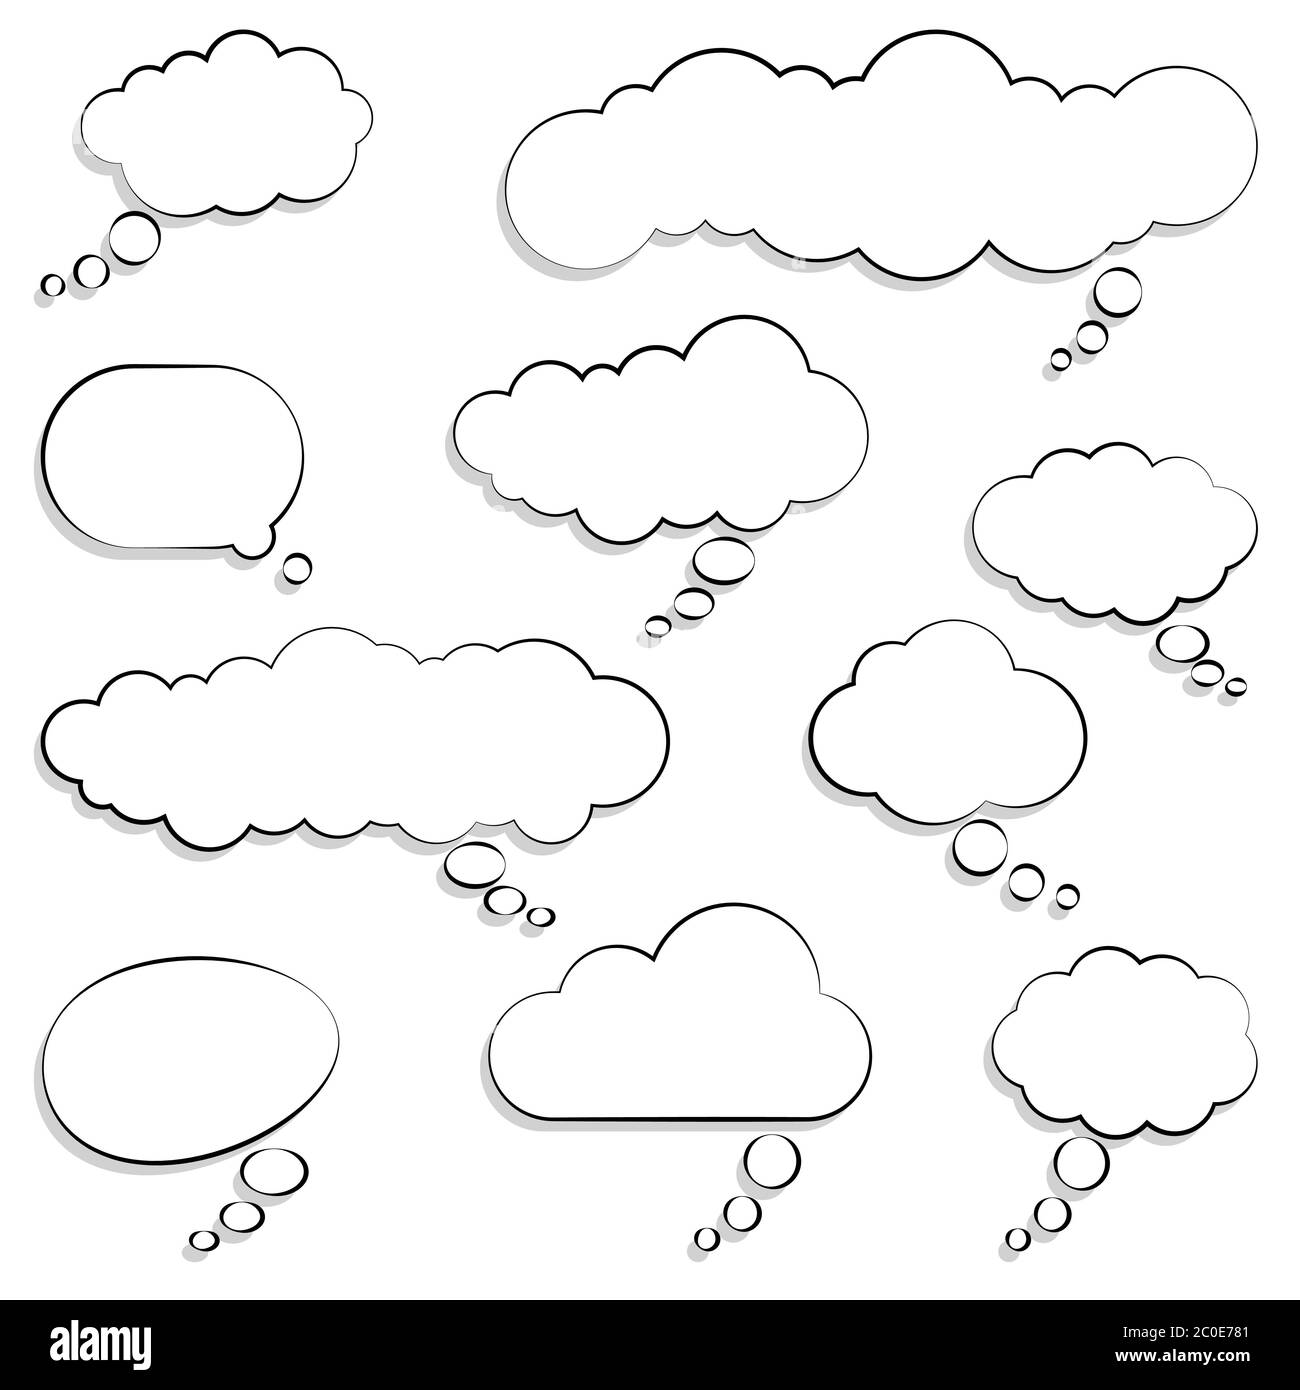 collection of different speech bubbles and thought bubbles with space for text Stock Photo